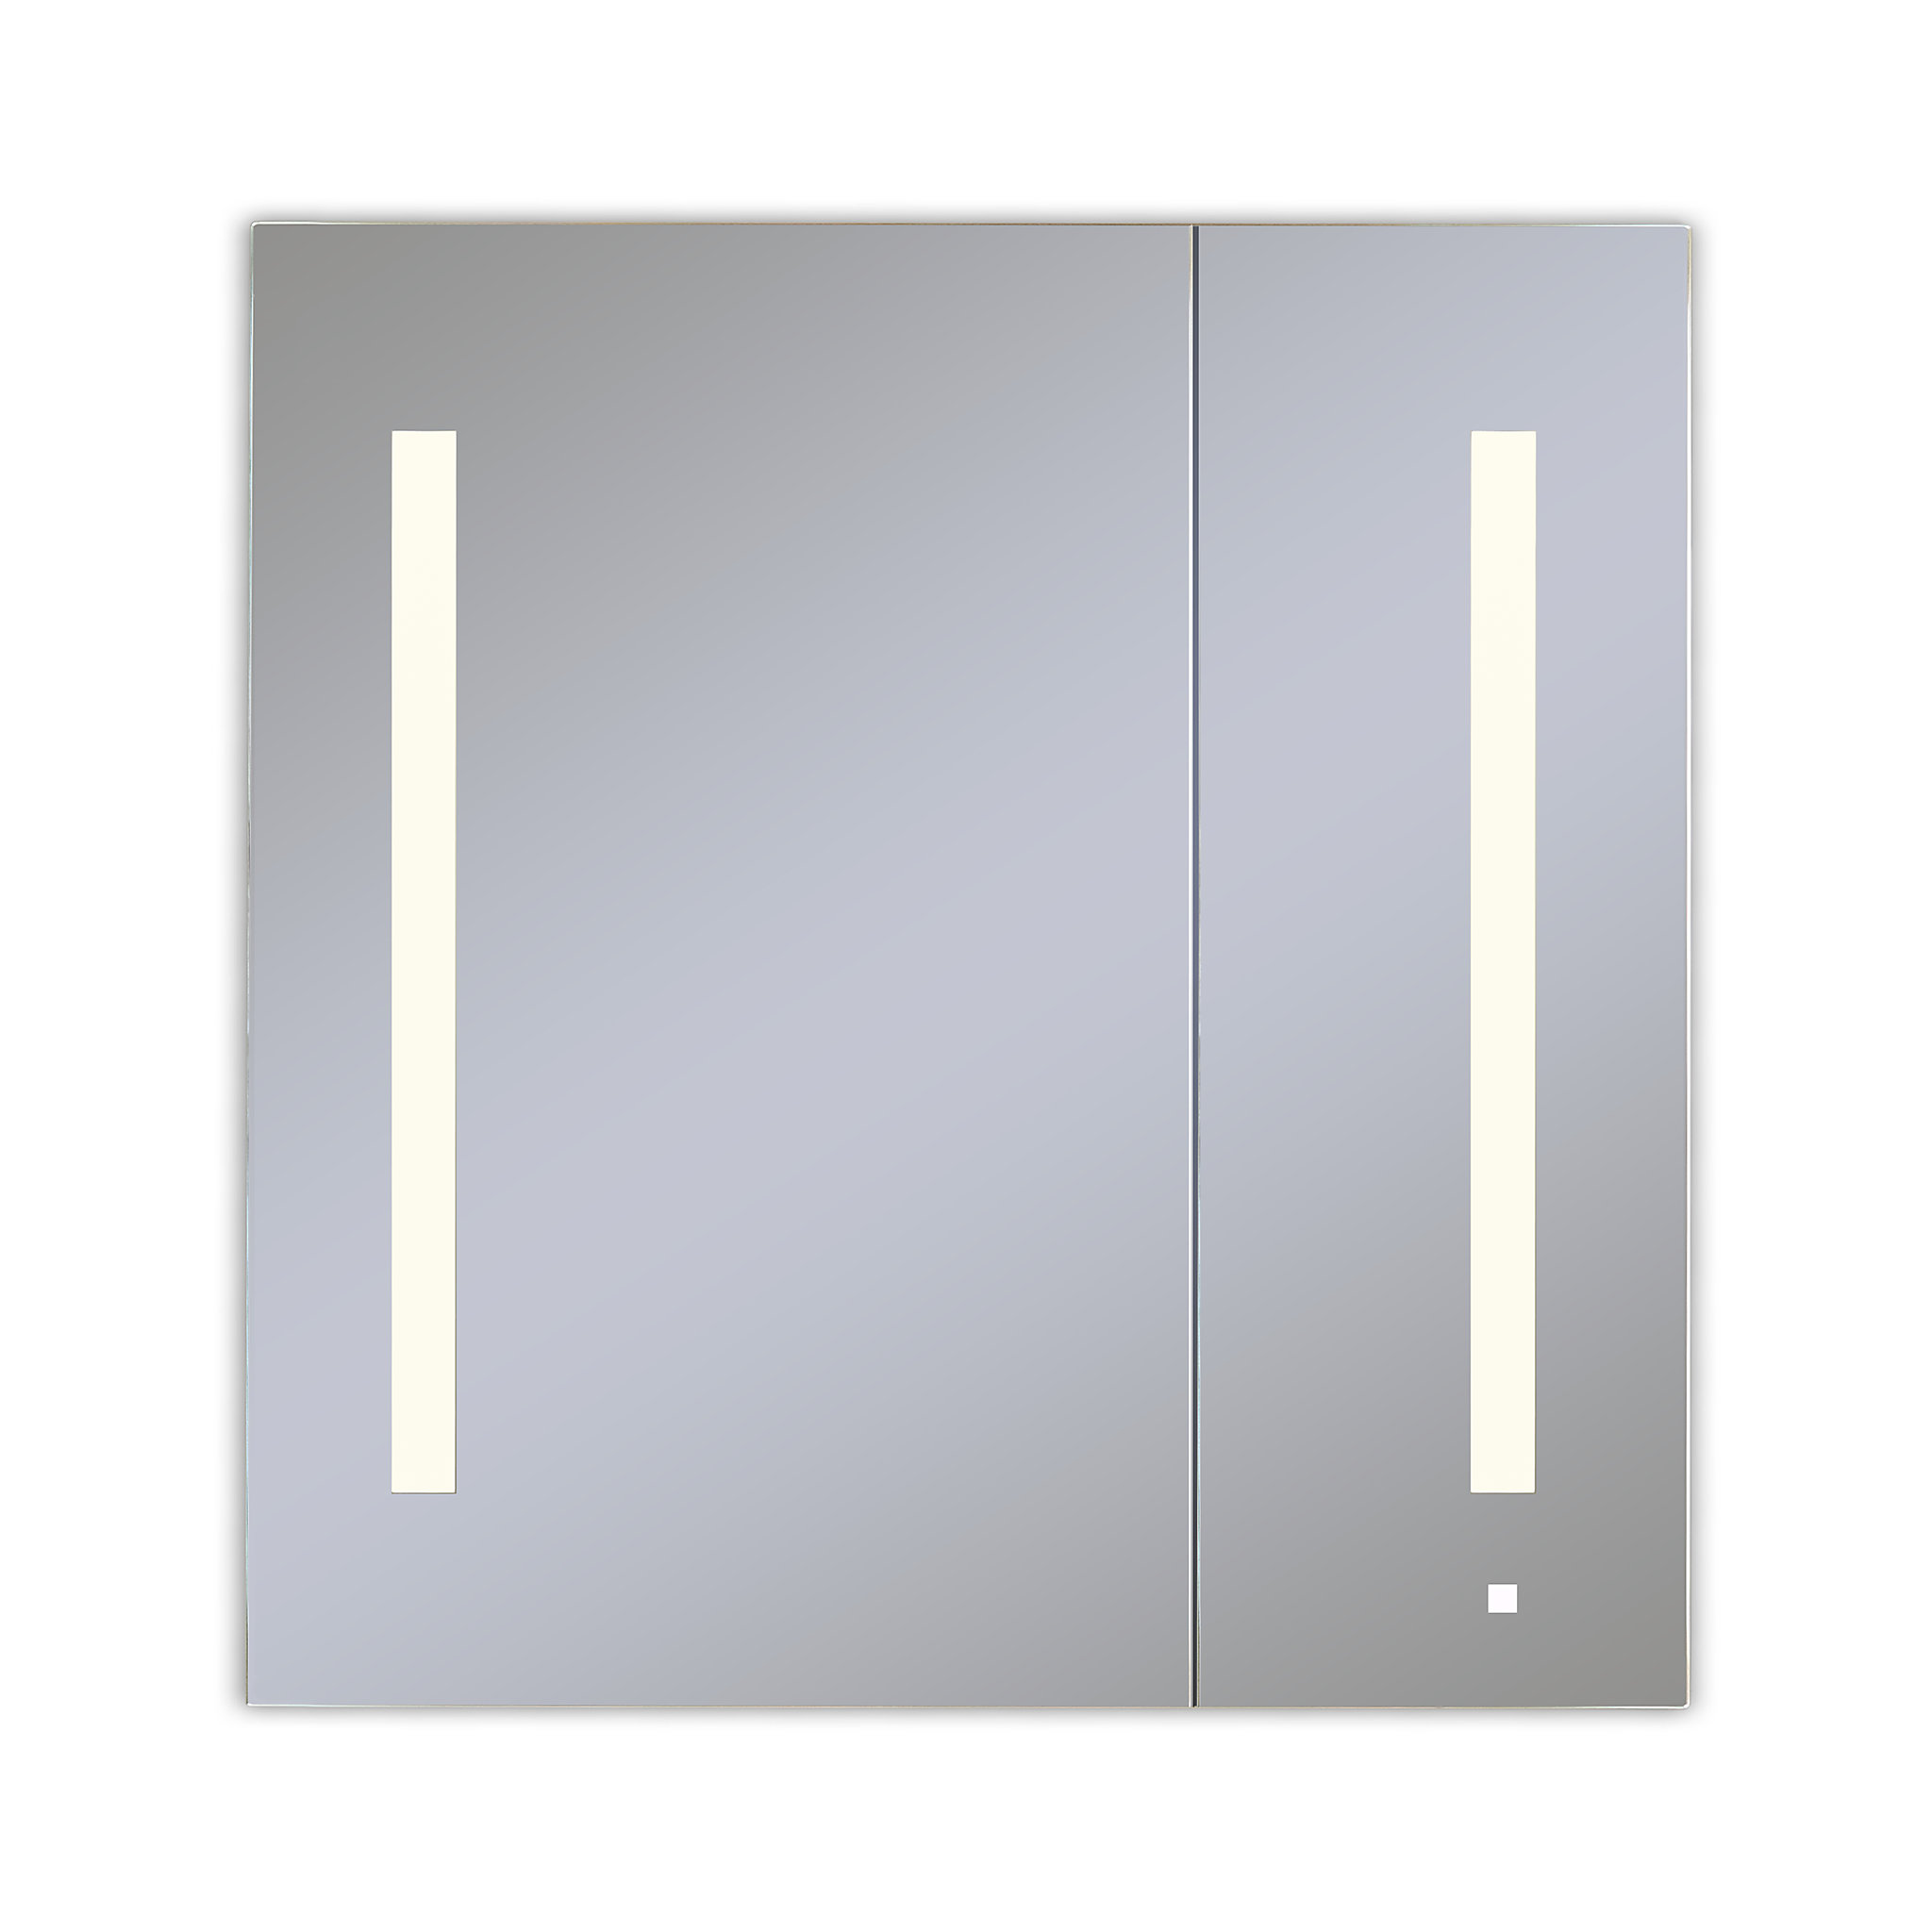 Robern AC3030D4P2LW AiO Lighted Cabinet, 30" x 30" x 4", Two Door, LUM Lighting, 2700K Temperature (Warm Light), Dimmable, Elect